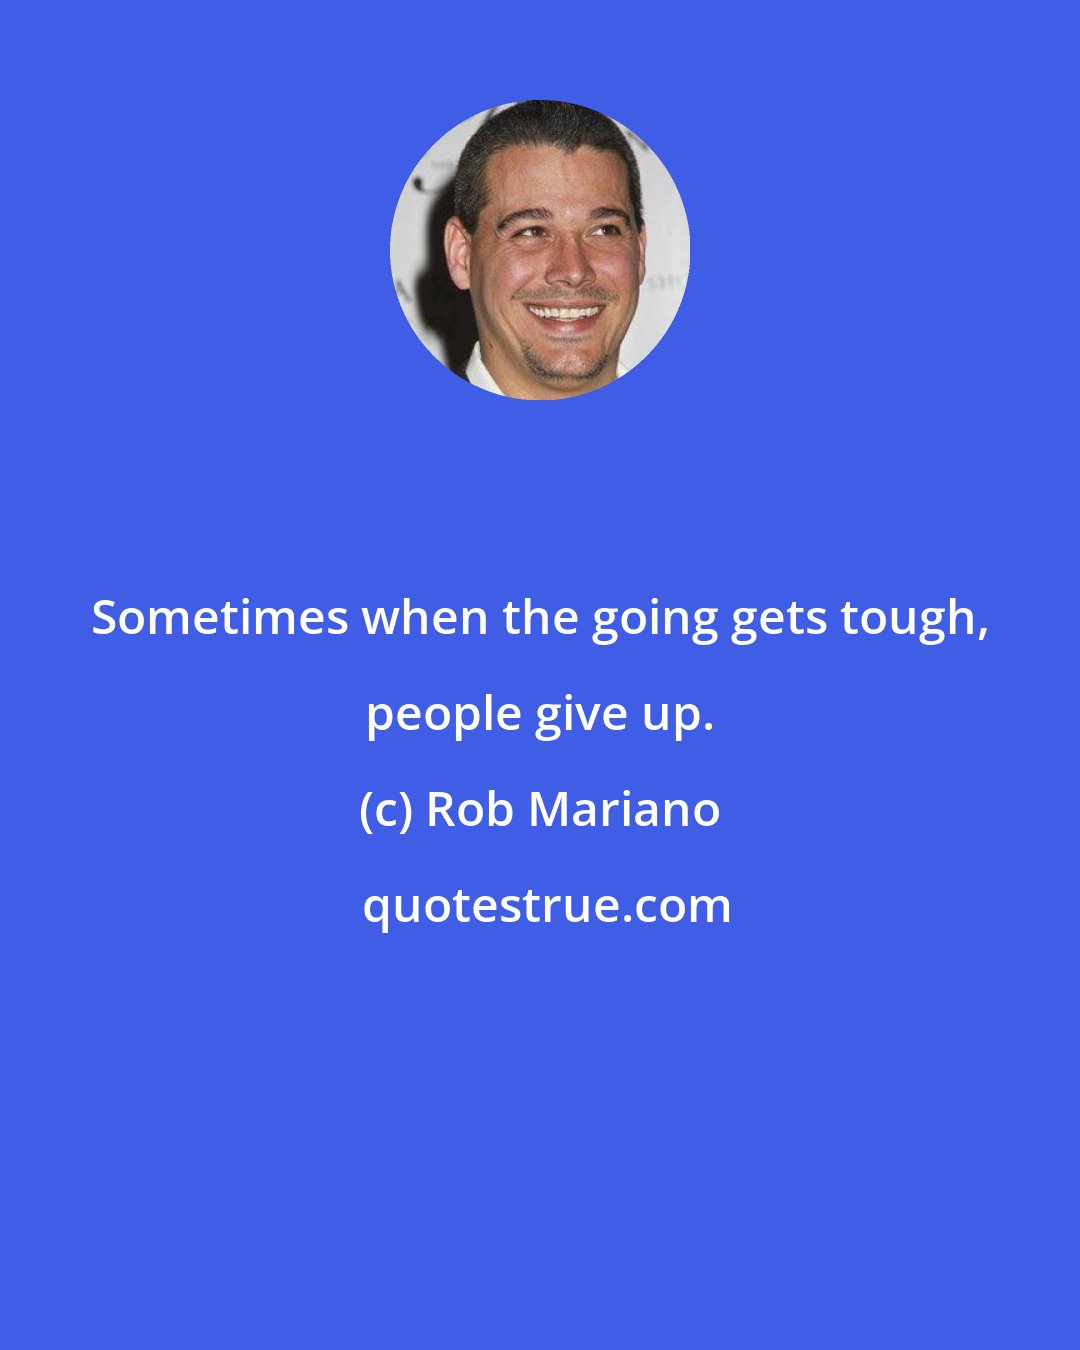 Rob Mariano: Sometimes when the going gets tough, people give up.